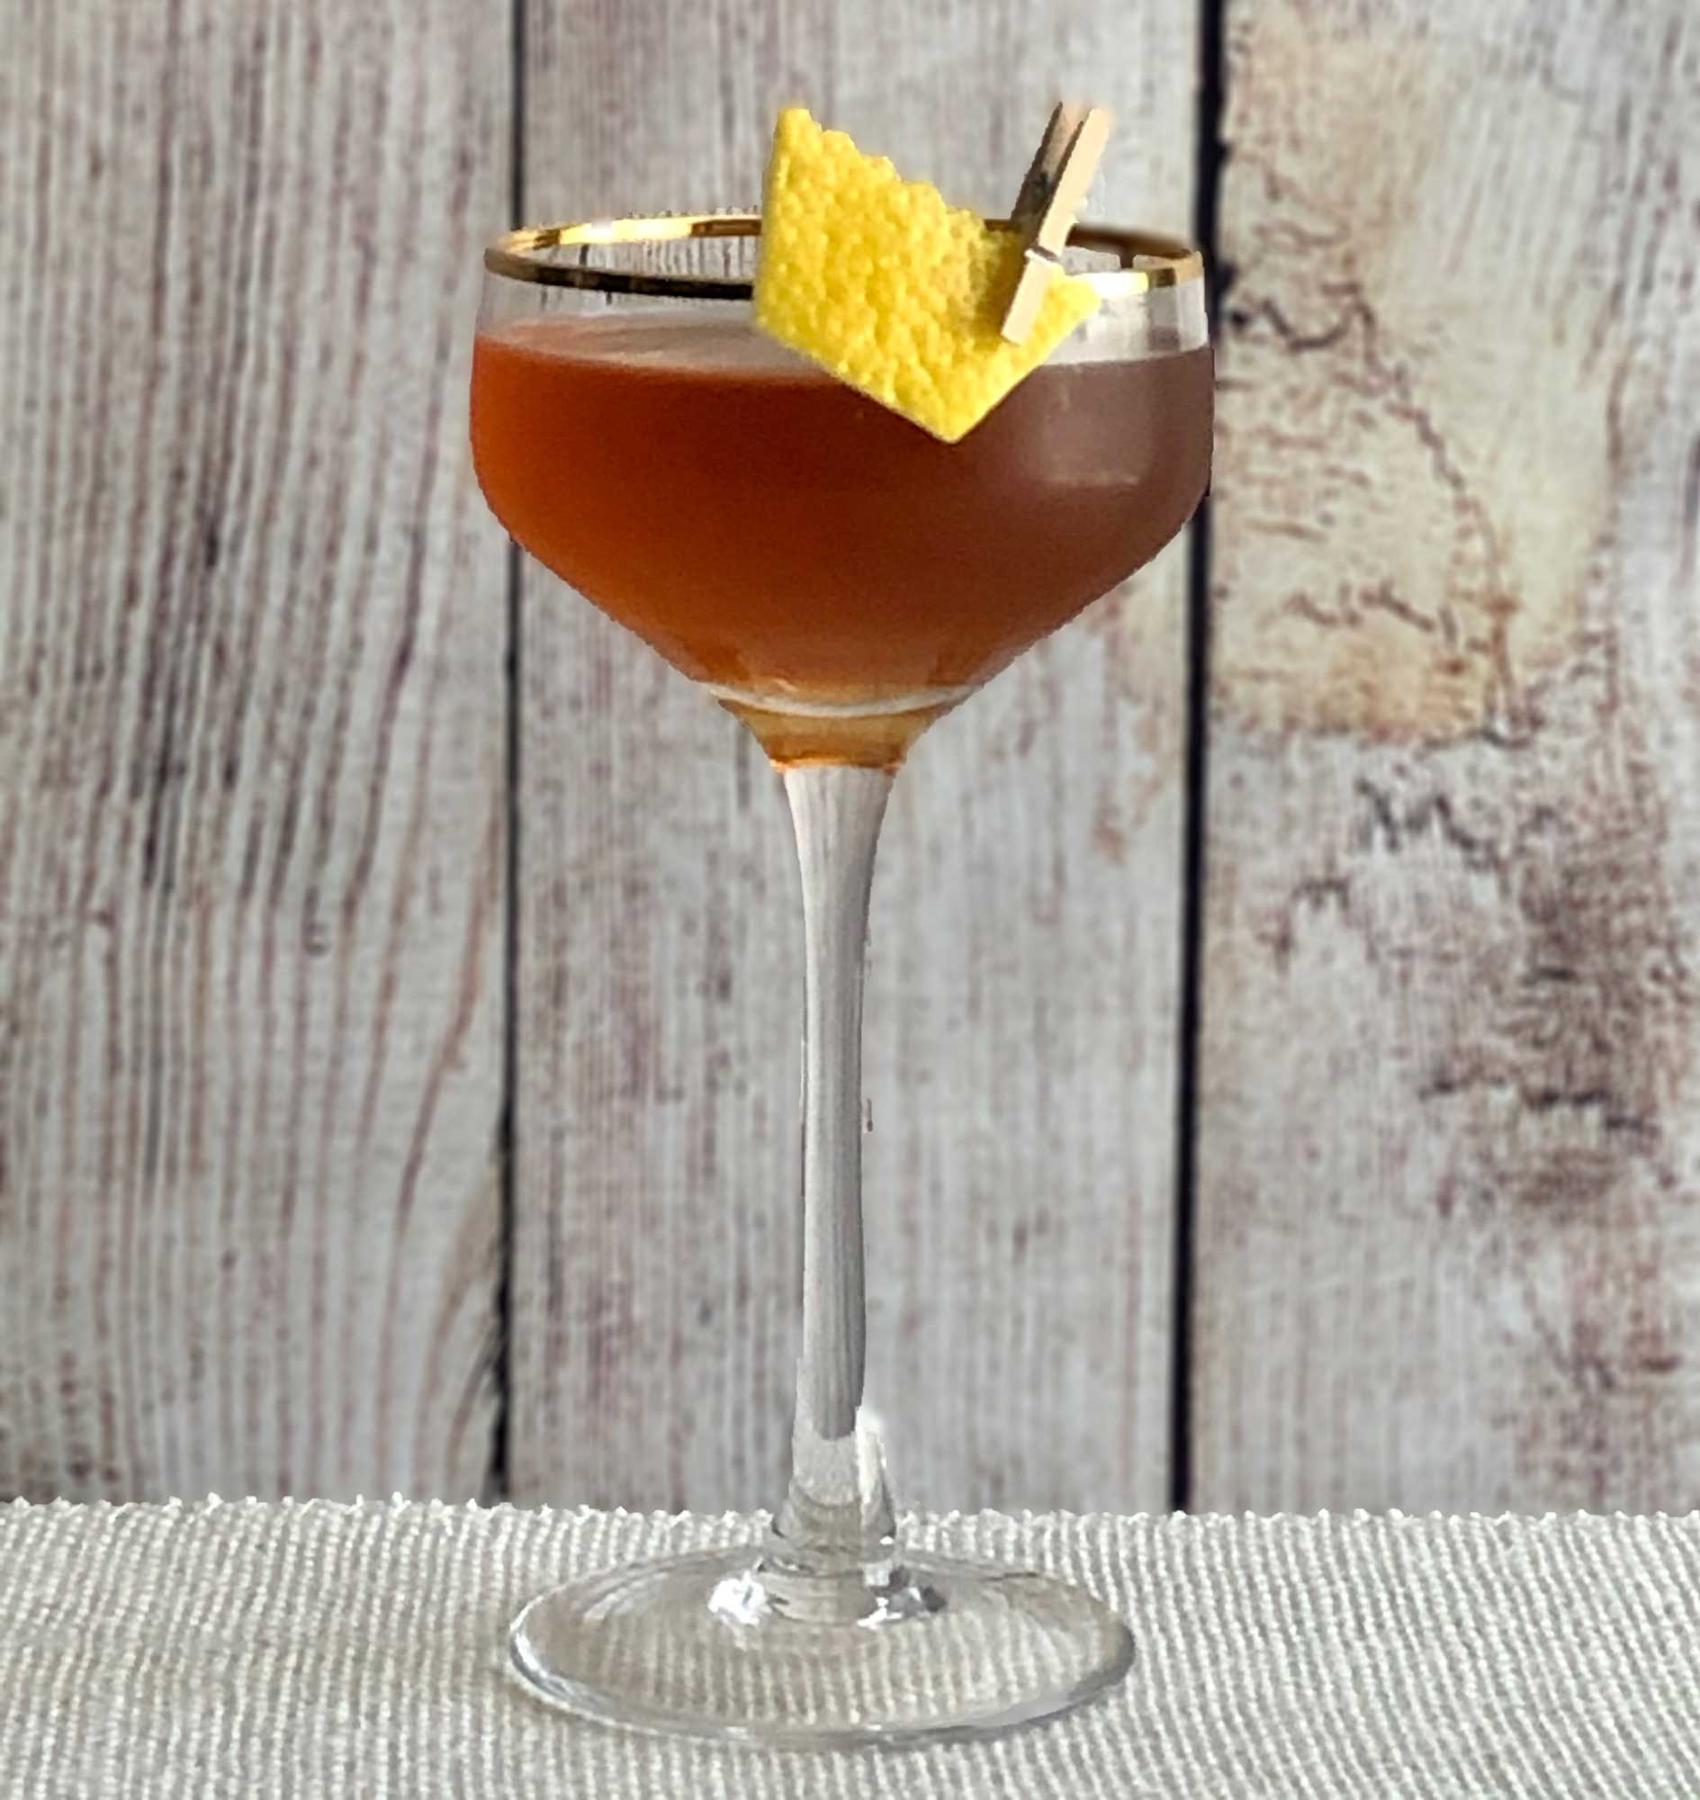 An example of the Return of the King, the mixed drink (drink), by John Filby, Augustine, NYC, featuring blended grain scotch, Pasubio Vino Amaro, Carpano Punt e Mes, and lemon twist; photo by Lee Edwards